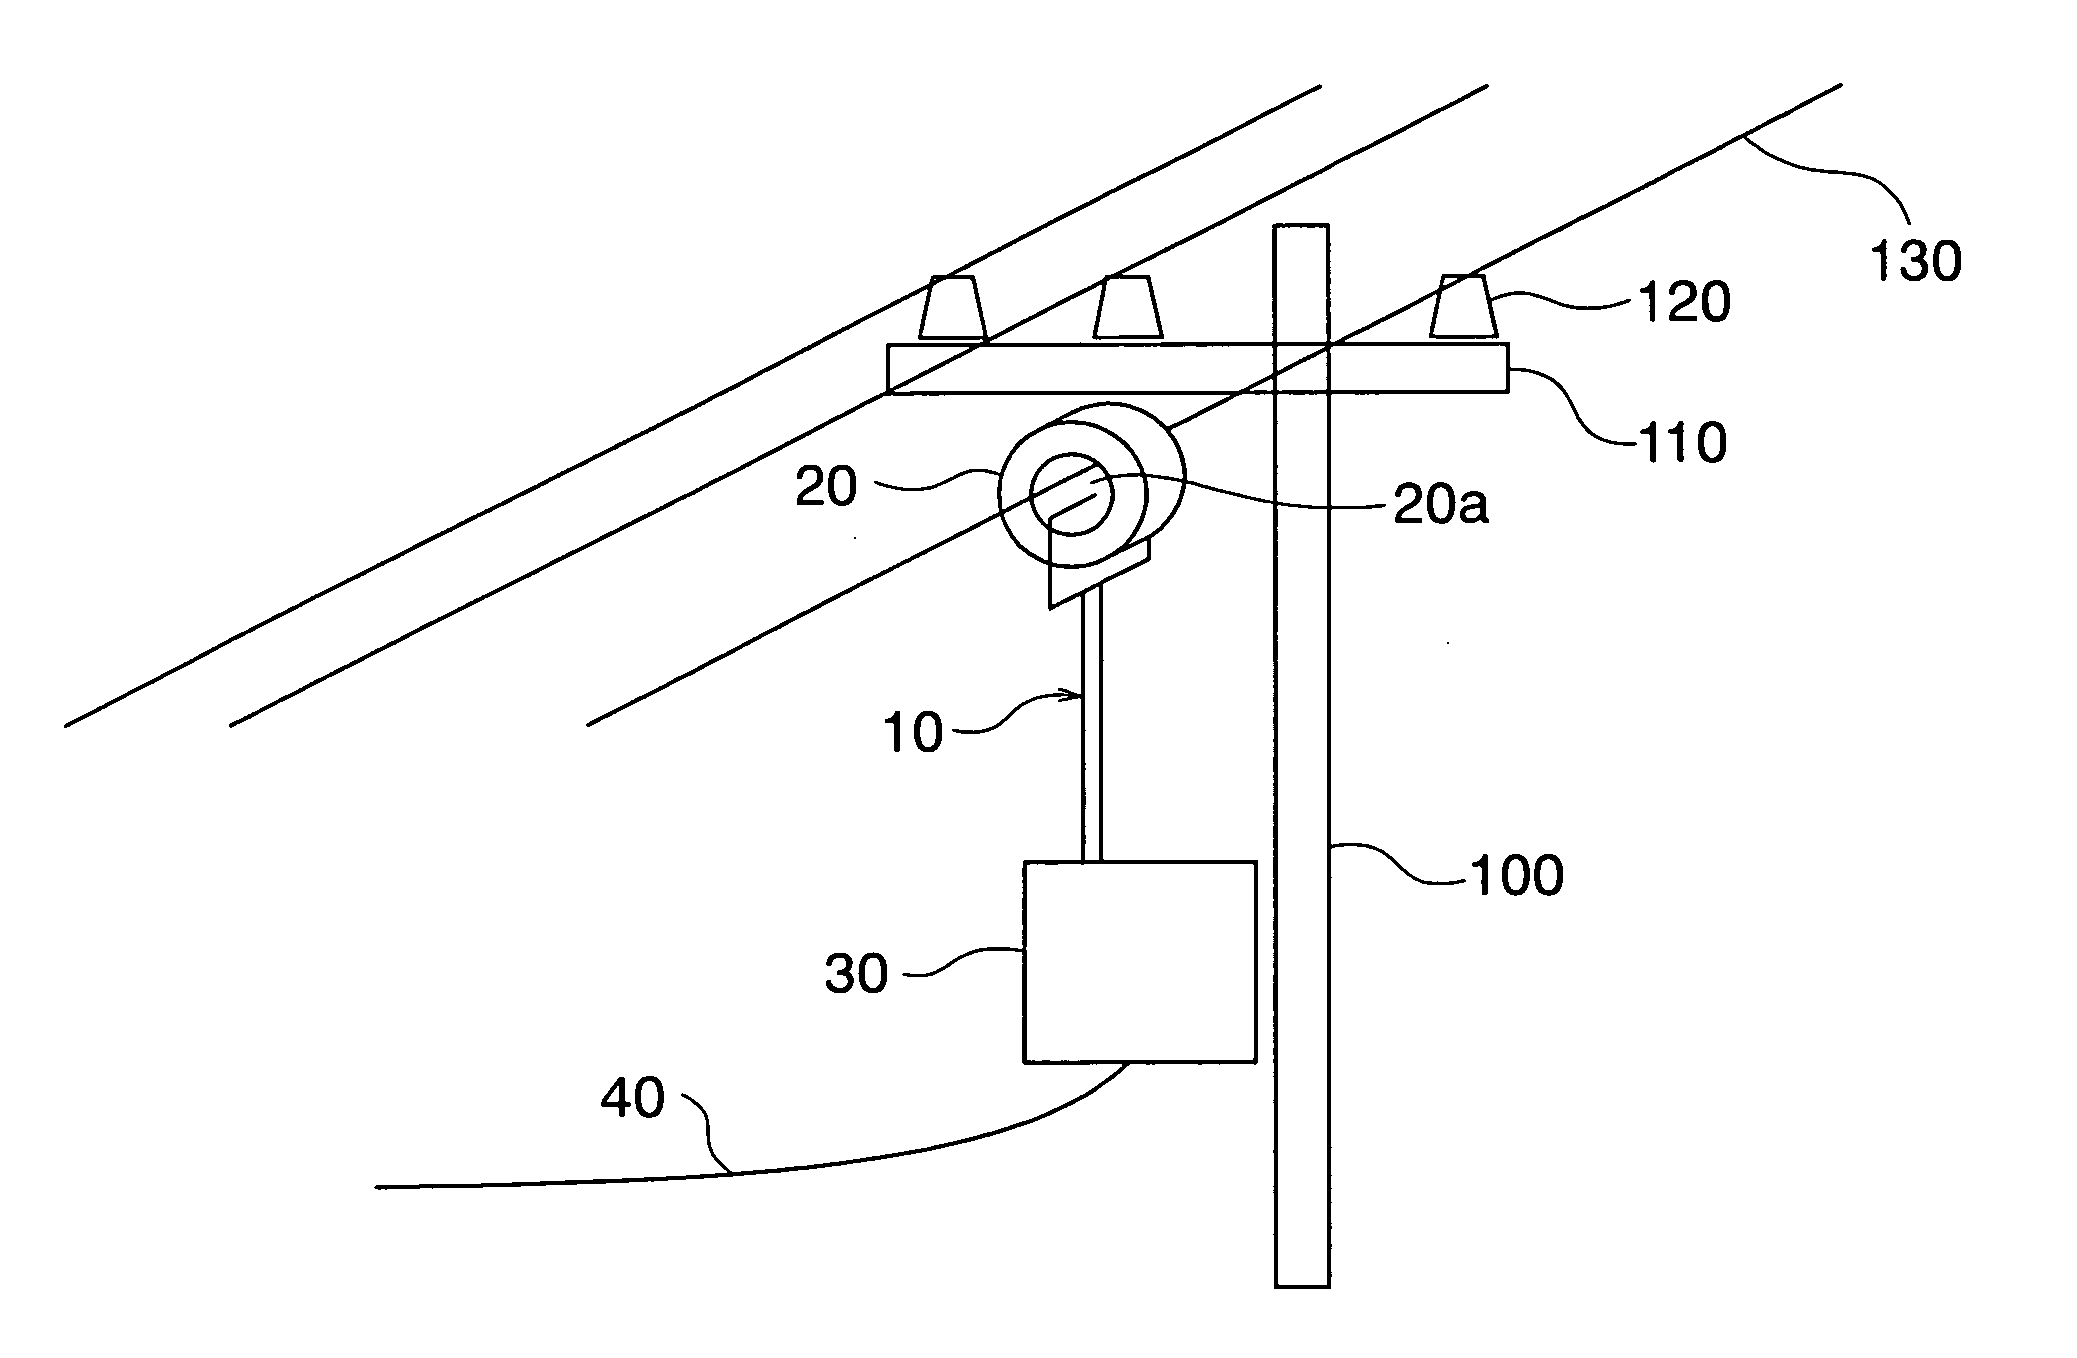 Signal coupling device